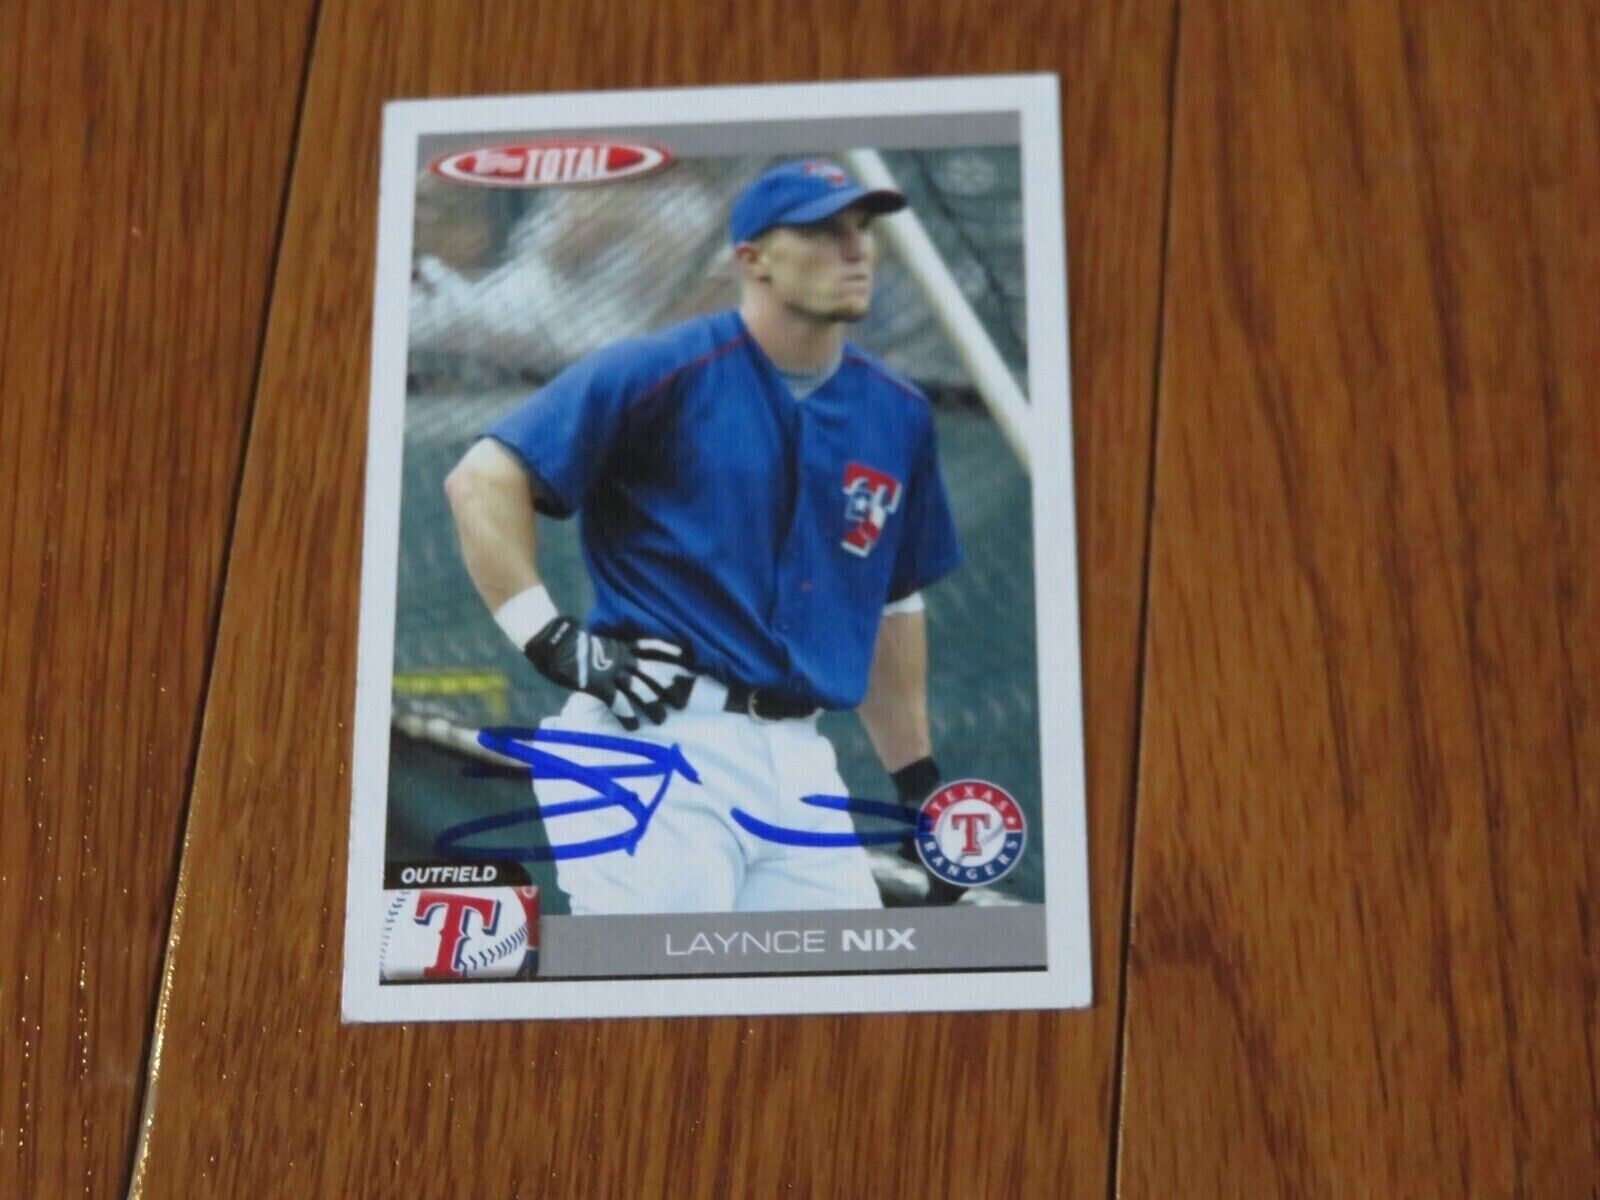 Laynce Nix Autographed Hand Signed Card Topps Total Texas Rangers